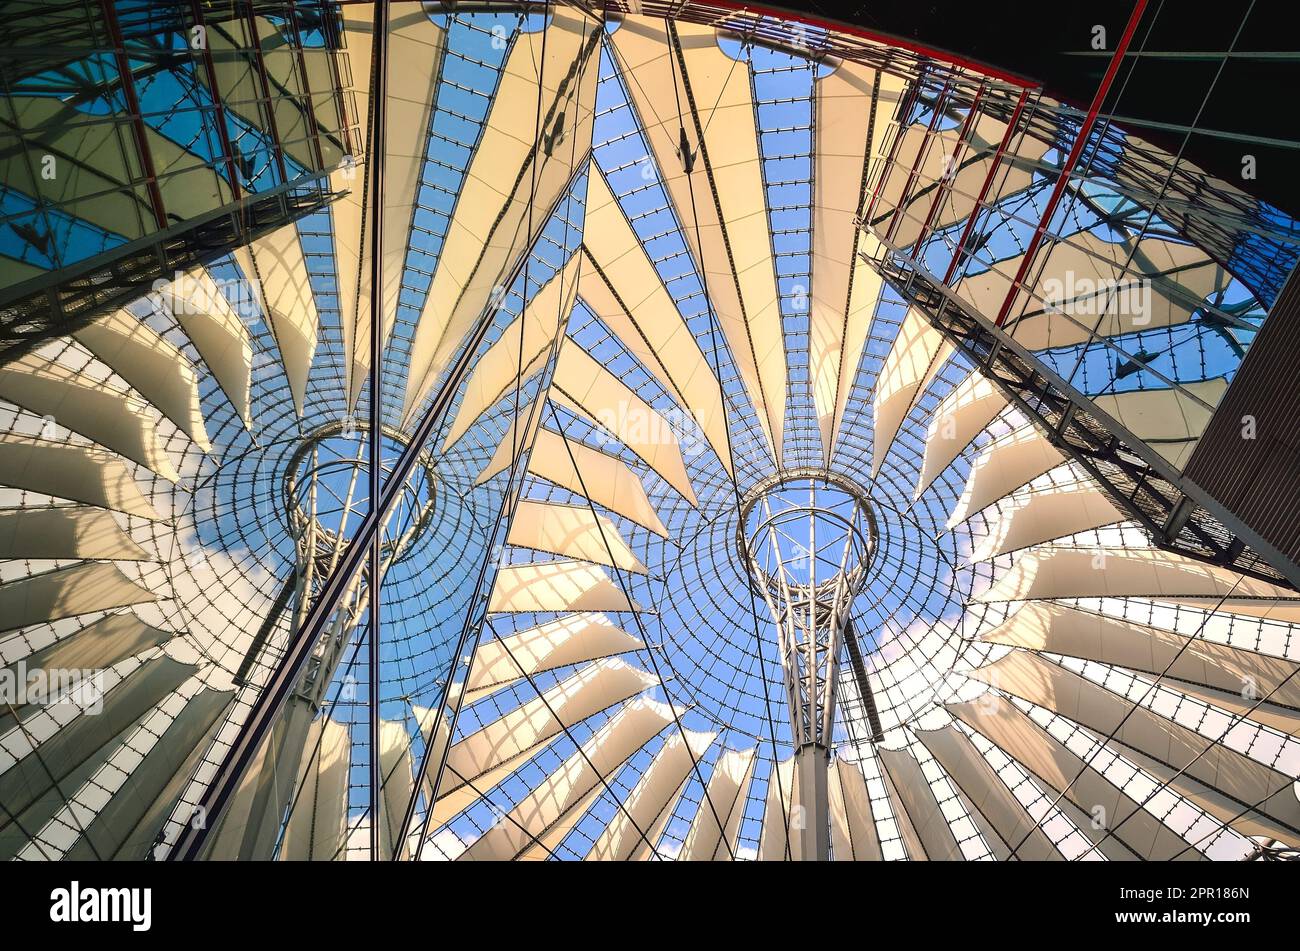 Berlin, Germany - April 30, 2014: The Sony Center on Potsdamer Platz. Sony Center located at the Potsdamer Platz is a Sony sponsored building complex, Stock Photo